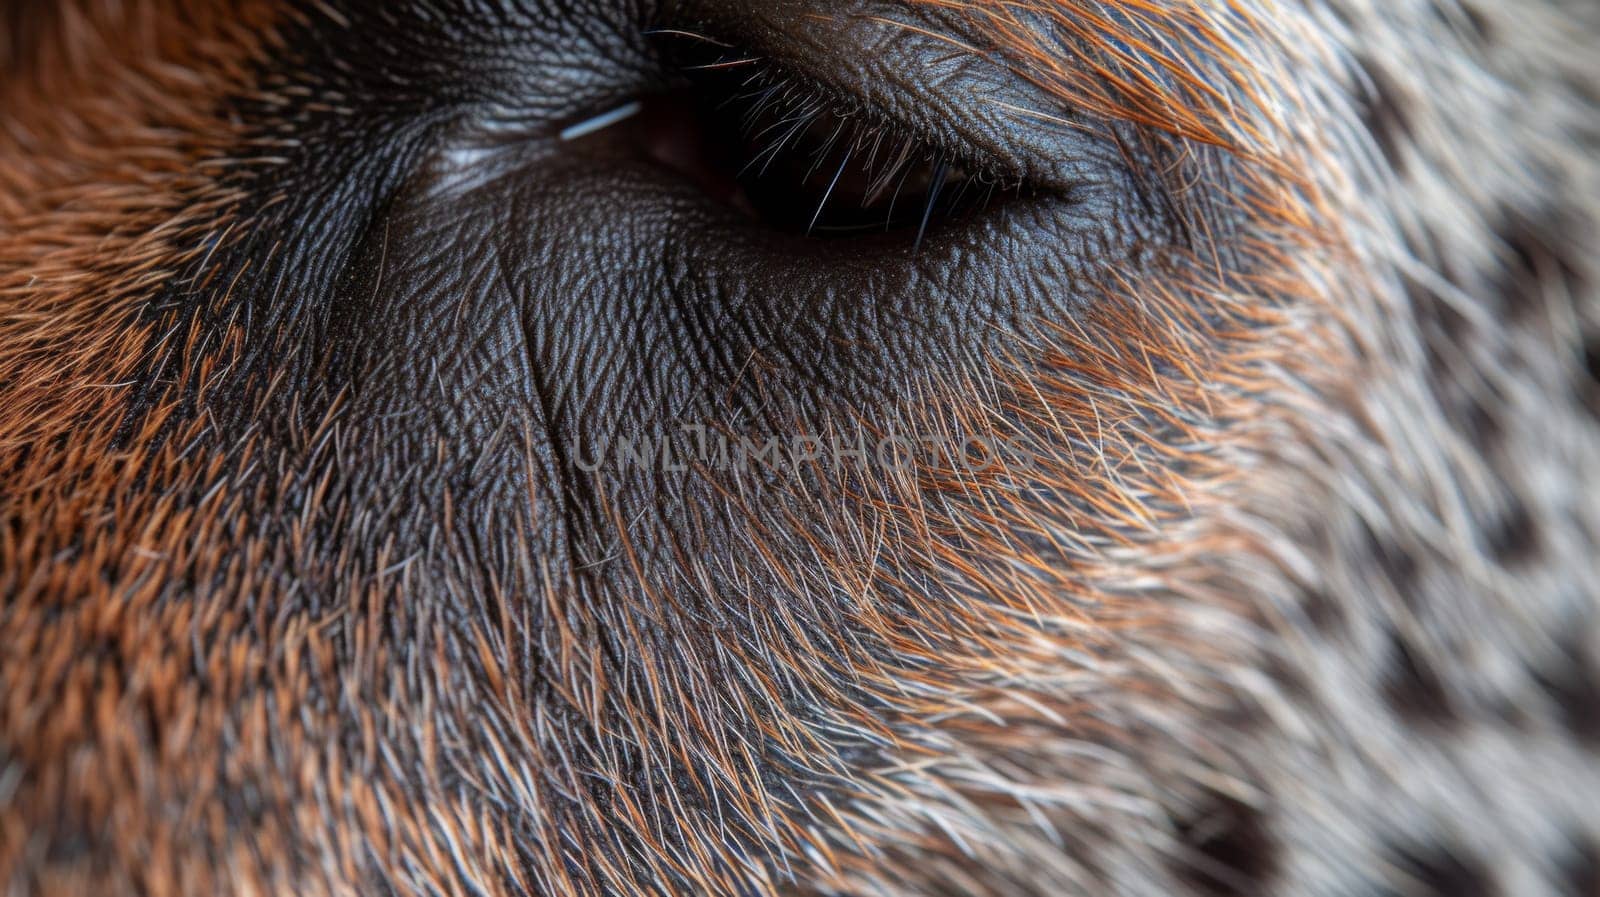 A close up of a giraffe's eye with its eyelids closed